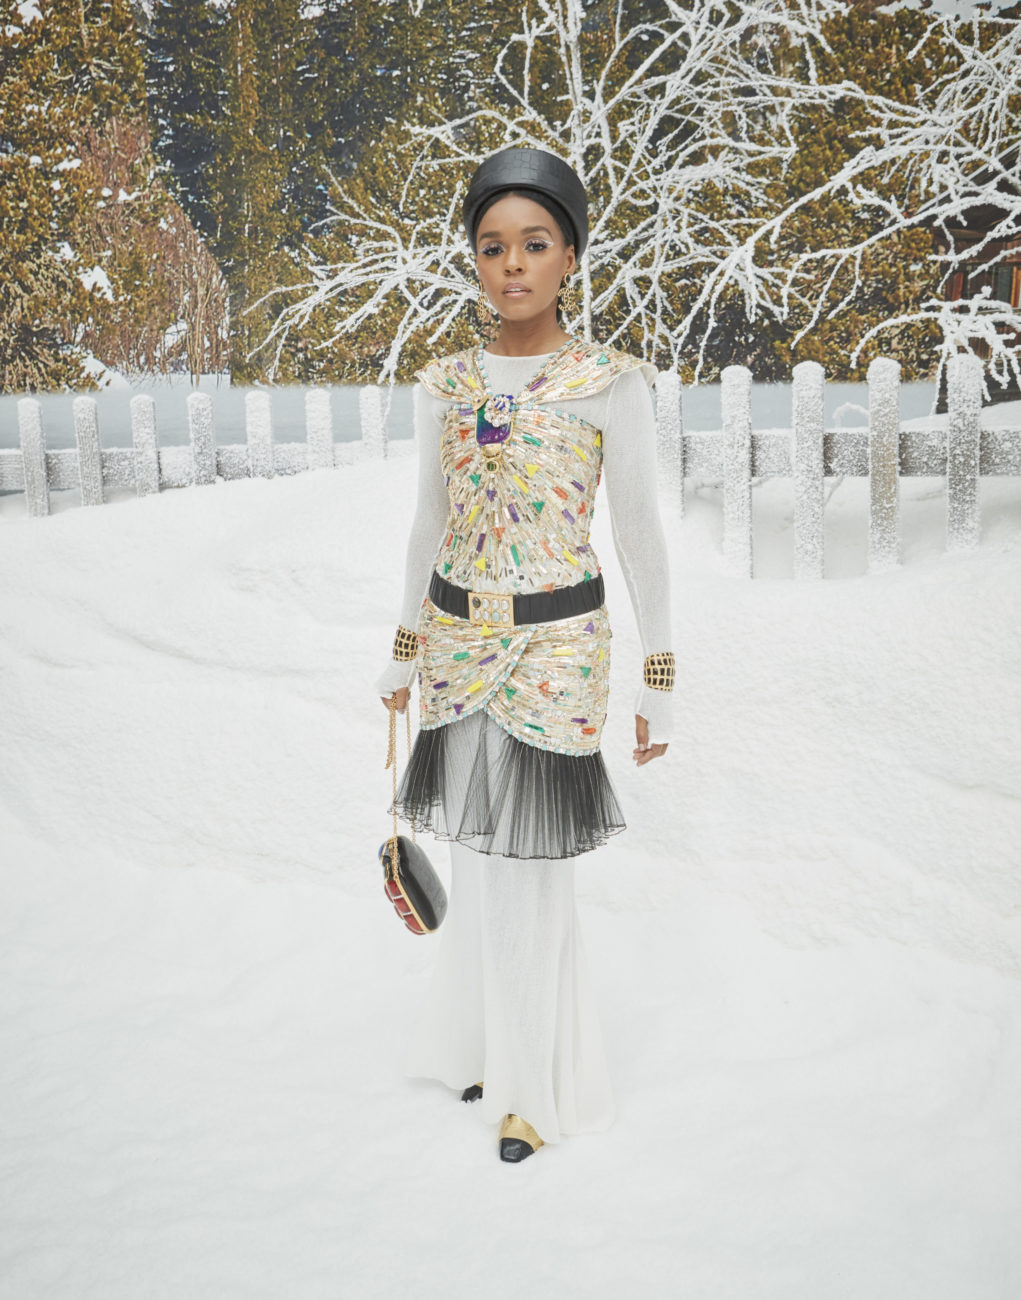 Janelle Monae, Chanel FW 2019 Collection, Courtesy of Chanel